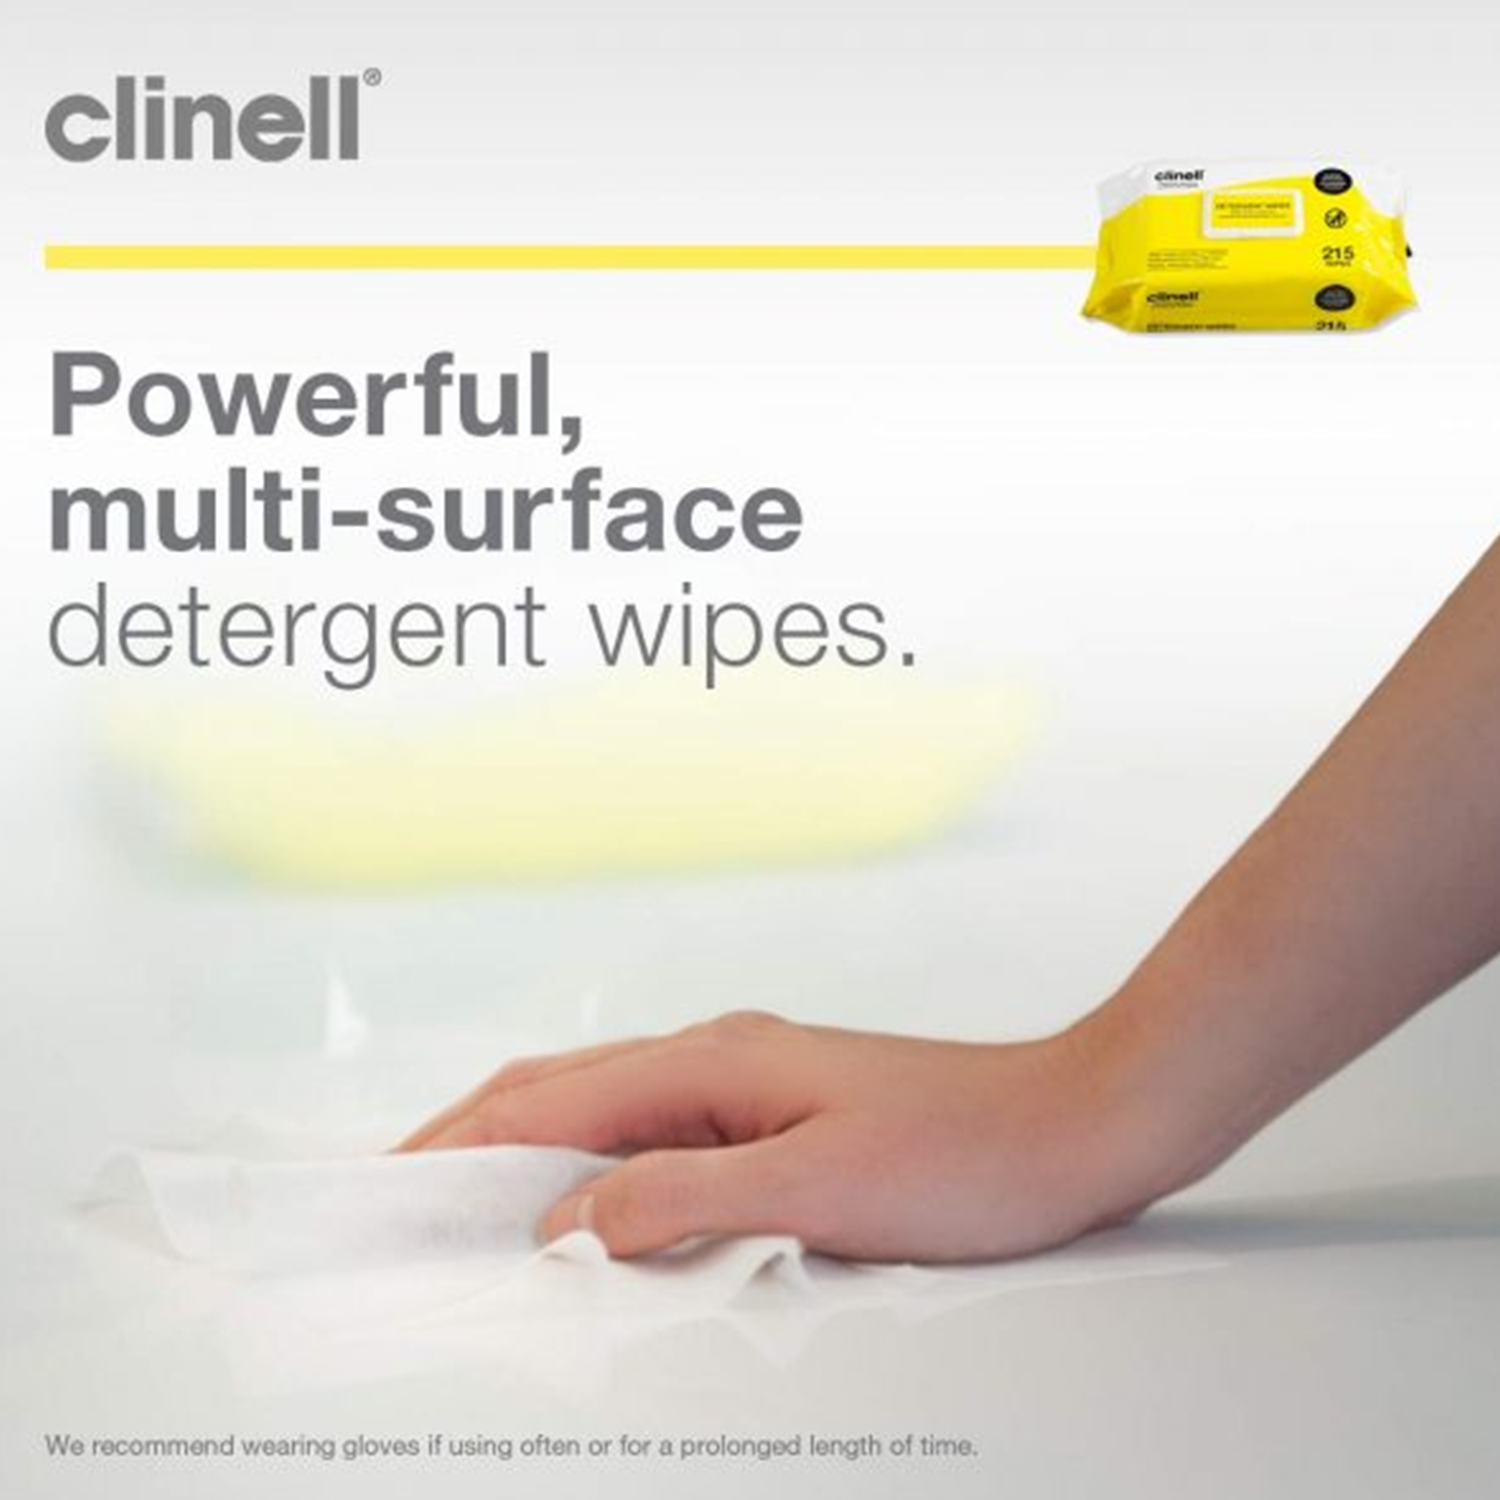 Clinell Detergent Wipes | 22 x 27.5cm | Pack of 215 (5)